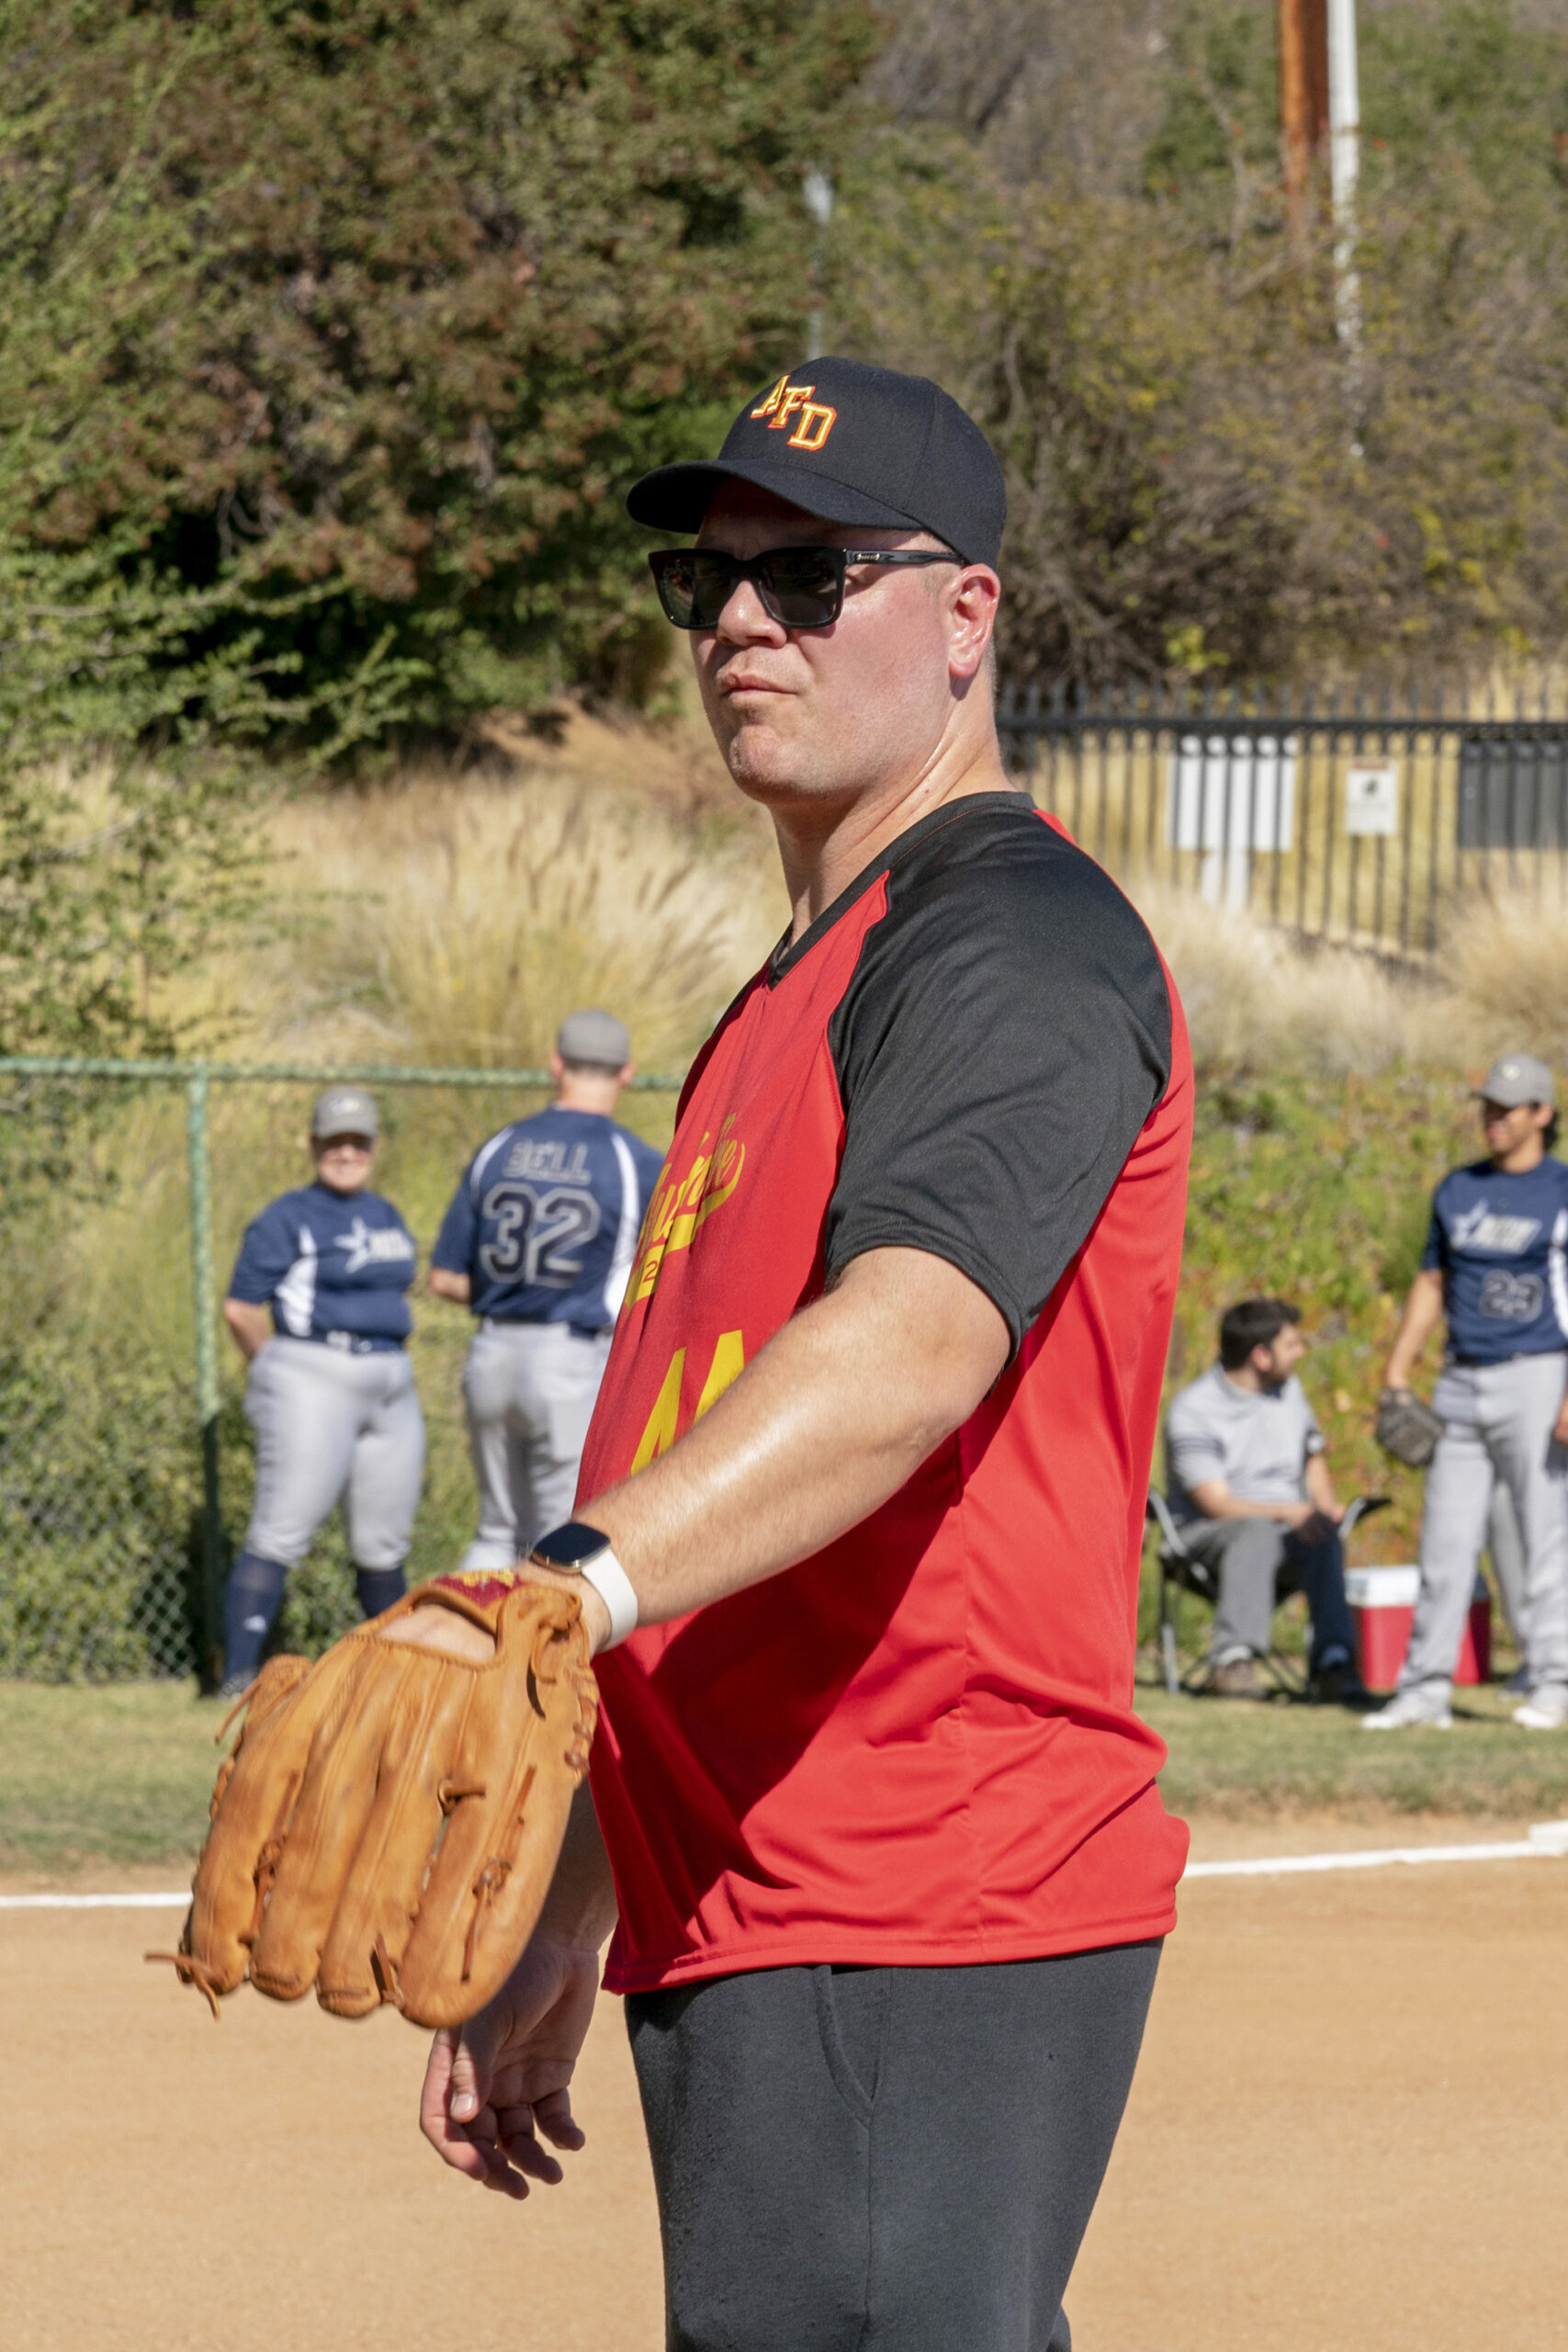 Jim Parrack as Judd playing baseball in 9-1-1: Lone Star